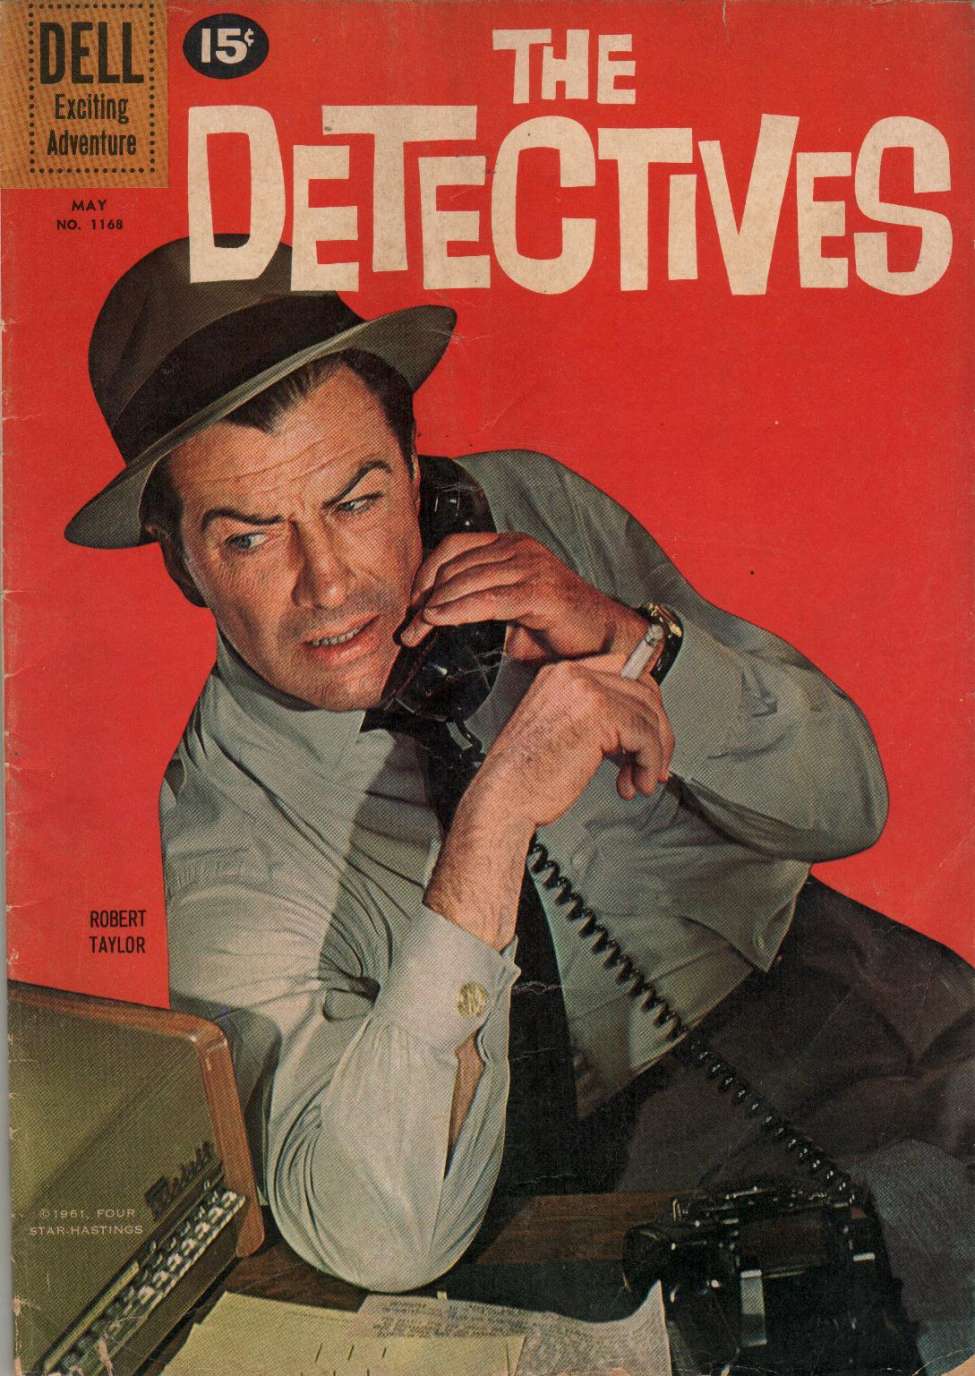 Book Cover For 1168 - The Detectives